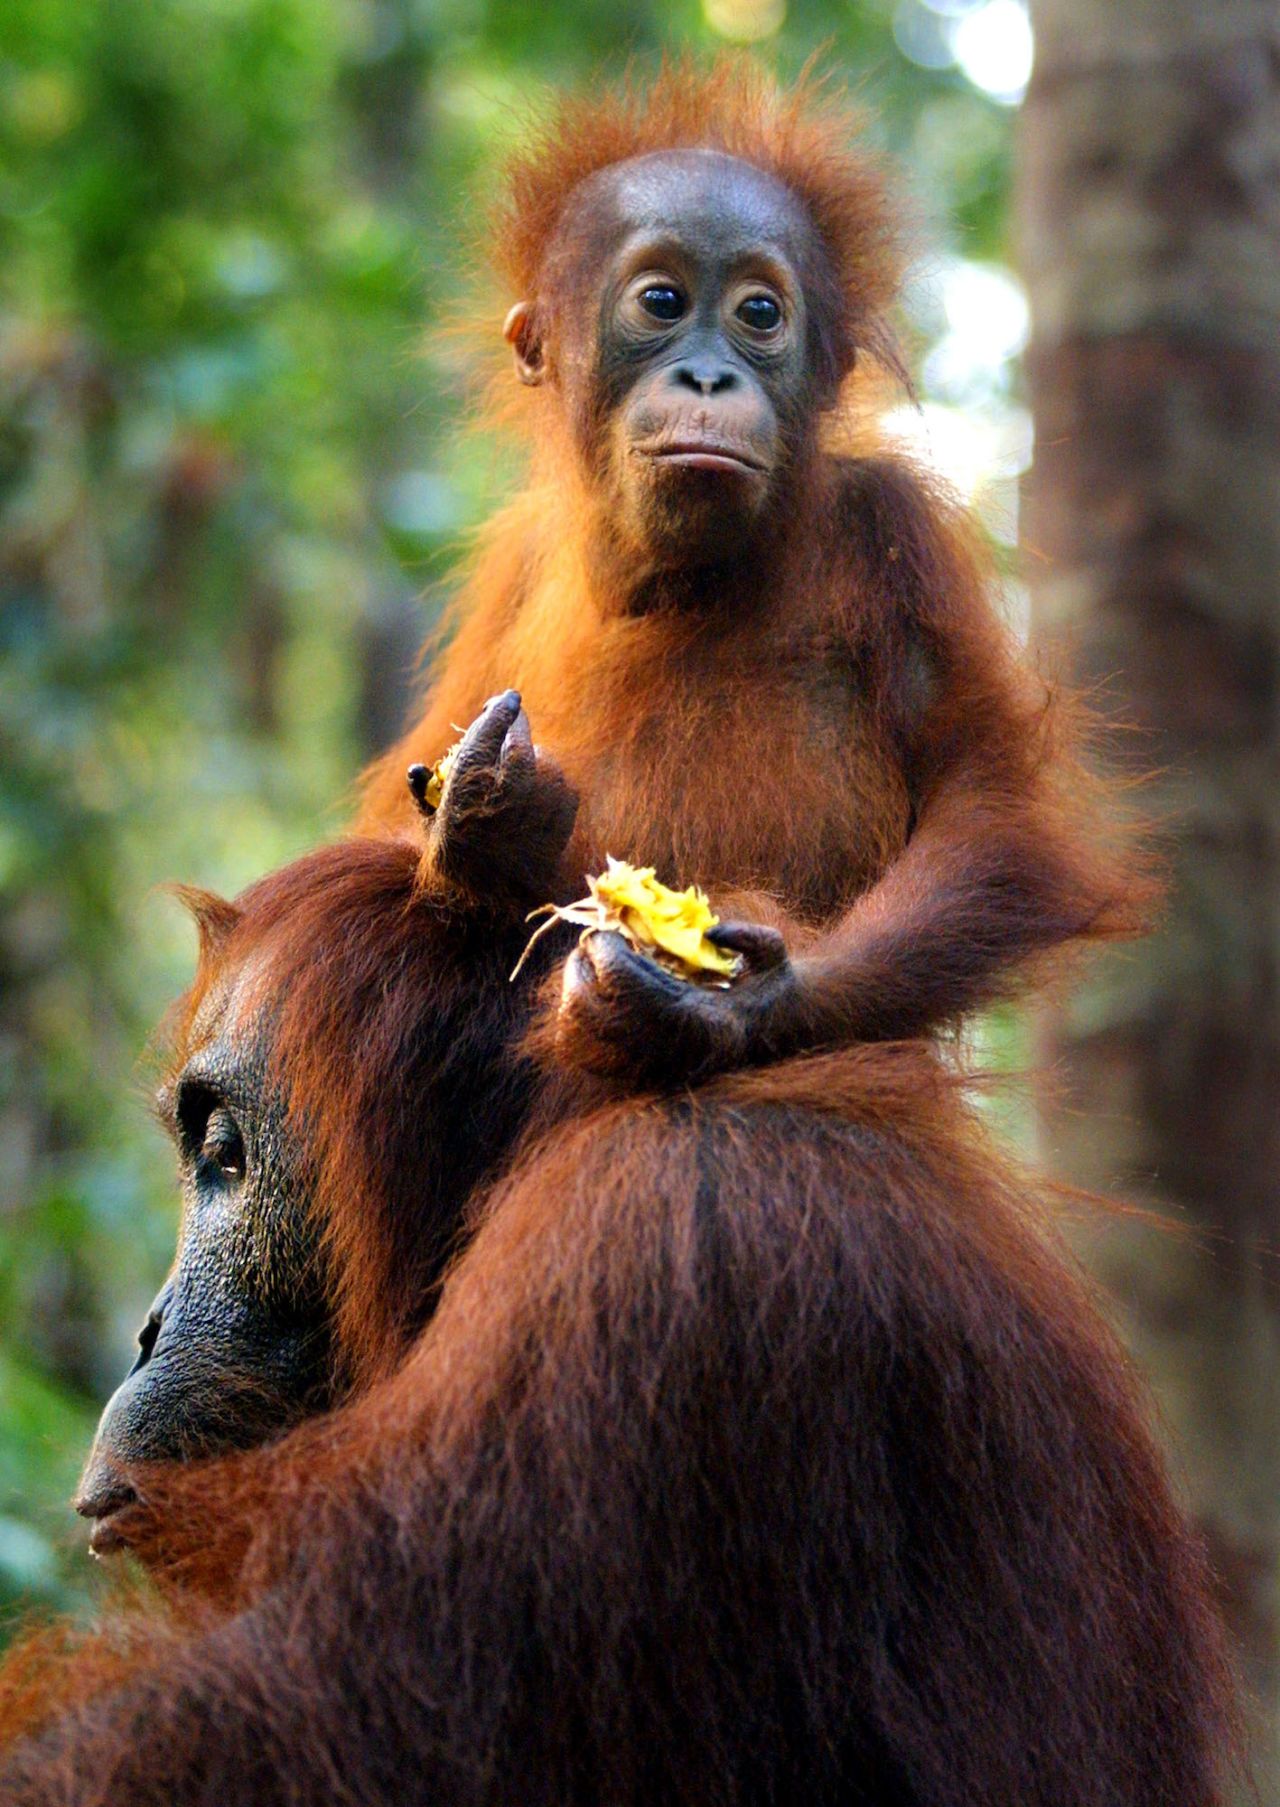 The Lesan forest area is home to one of Borneo's largest populations of wild orangutans, although the vegetation is so thick that sightings aren't guaranteed.